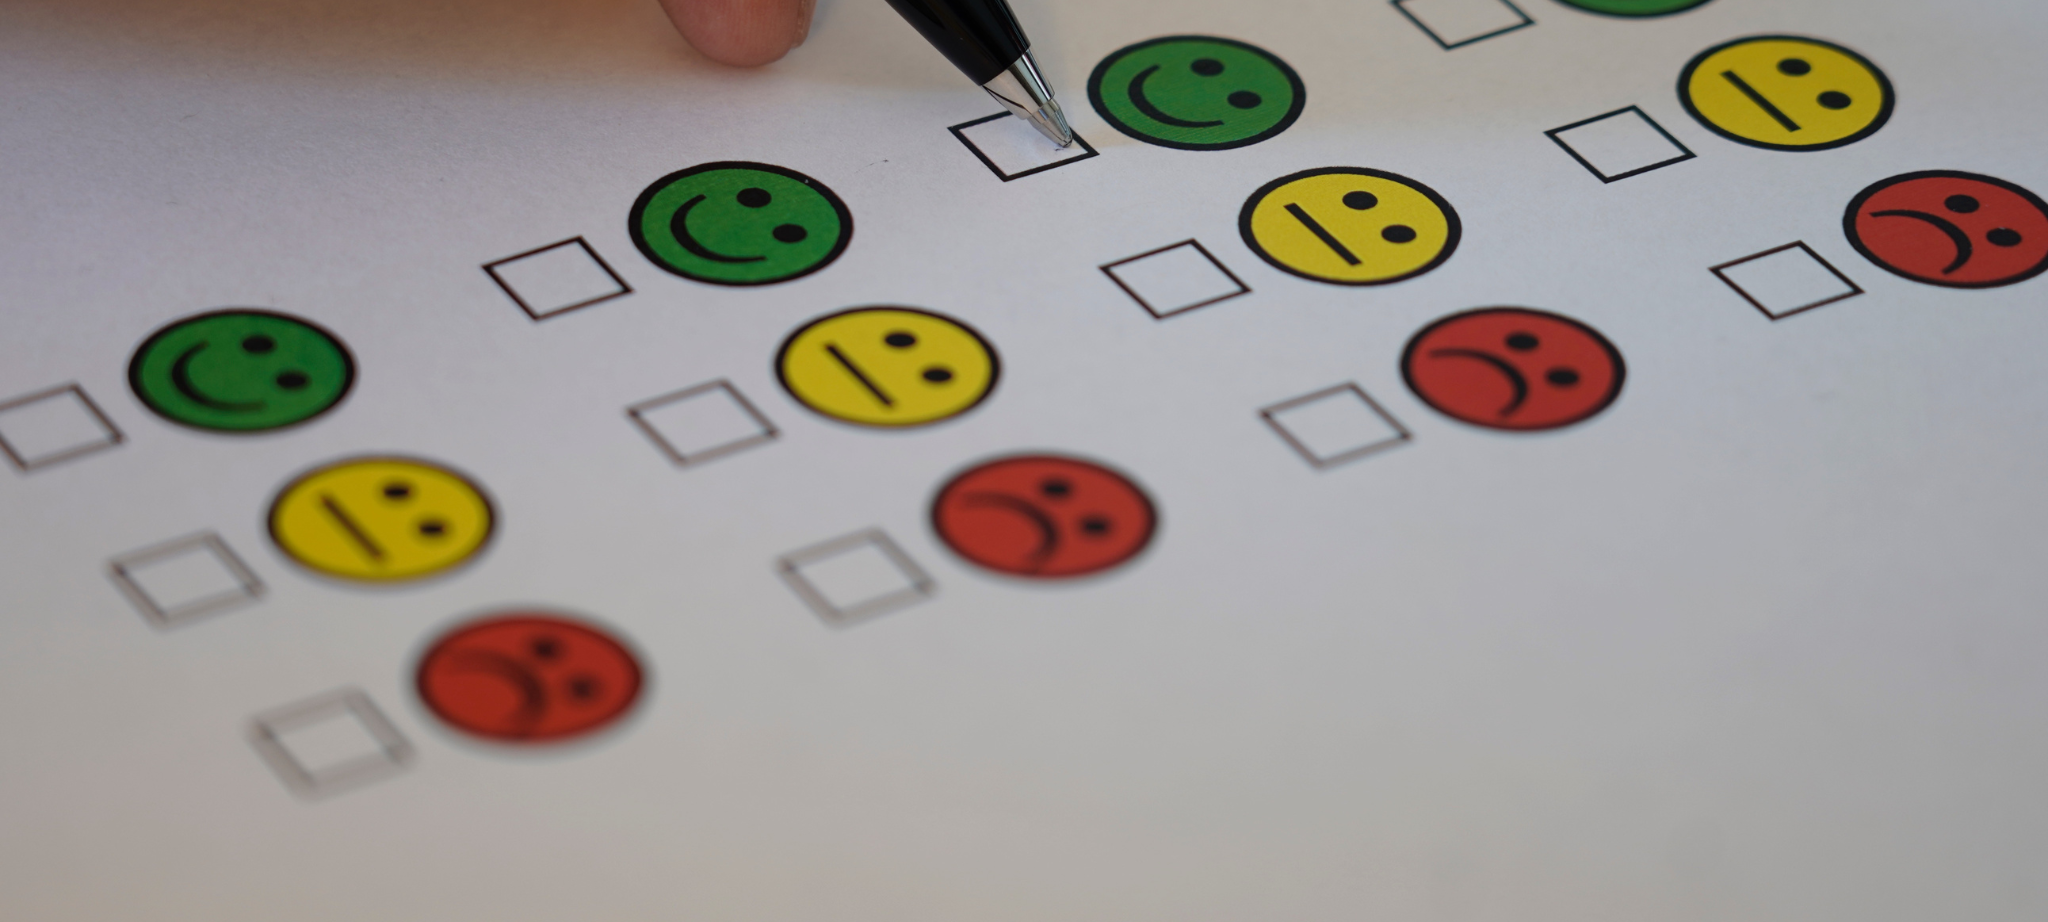 8 key questions to include in an event feedback survey